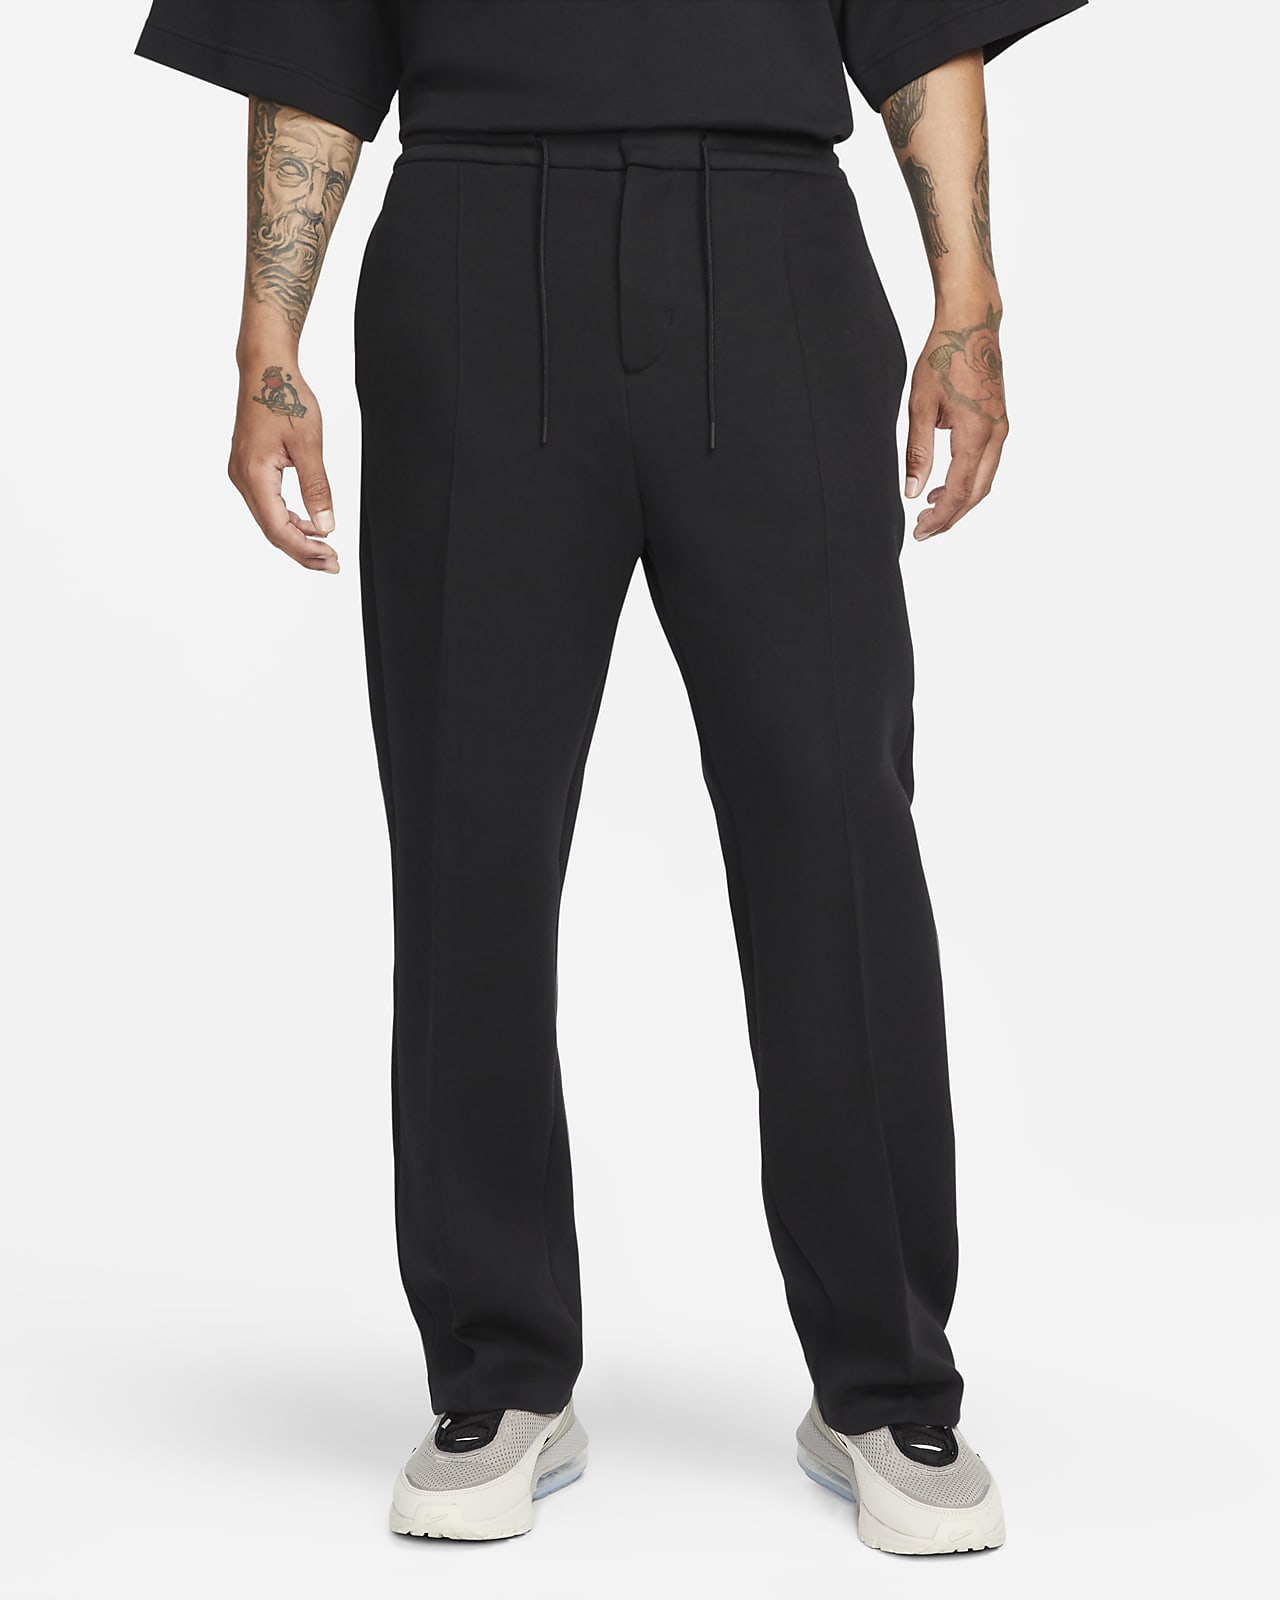 Adidas track pants - xl or XXL, any loose fit and straight leg style